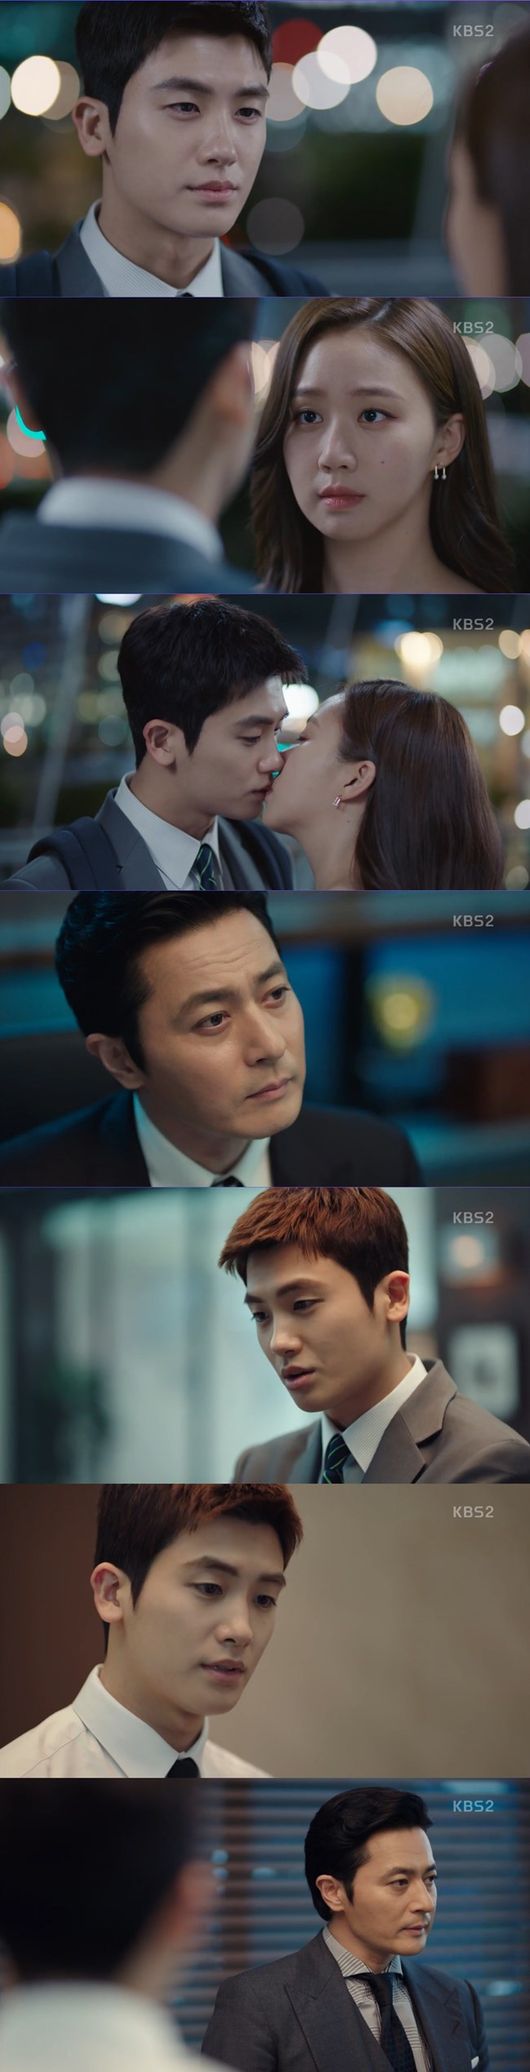 In the 13th Suits broadcast on the afternoon of the 6th, the charm of Park Hyung-sik was shining.On the day of the show, Kim Ji-na (Ko Sung-hee) and Ko Yeon-woo (Park Hyung-sik), who became a couple, were portrayed.He was also a late actress who tried to help the crisis-ridden Miniforce stone (Jang Dong-gun).Ko was a character who went very well with Park Hyung-sik, a character who wanted to be a lawyer but didnt have anything to do with it.He has captured the Miniforce seat with his memory like a photo, and he is always doing his best to say that he does not want to be his weakness.Especially, when he deals with the case, he is added to the human aspect and is completed with a richer character.Ko Yeon-woo continues the story of Suits with romance with Miniforce and romance with Kim Ji-na.Although his childhood wounds have also bothered him, he is doing his best for the Miniforce seat that believes in him.Kim Ji-na and Kimi, who have become a couple, are also attractive, though they are entangled in an uncomfortable first impression.Park Hyung-sik is completing Jang Dong-gun and romance with Ko Sung-hee, too, if he is completing romance.The two people who have entered into a full-scale love mode are growing up their hearts and hearts.Park Hyung-sik is completing a charming couple synergy with Ko Sung-hee as in Lim Ji-yeon and Park Bo-young.It is a performance as Chemie Princess Maker.KBS 2TV Broadcast Screen CaptureKBS 2TV Broadcast Screen Capture